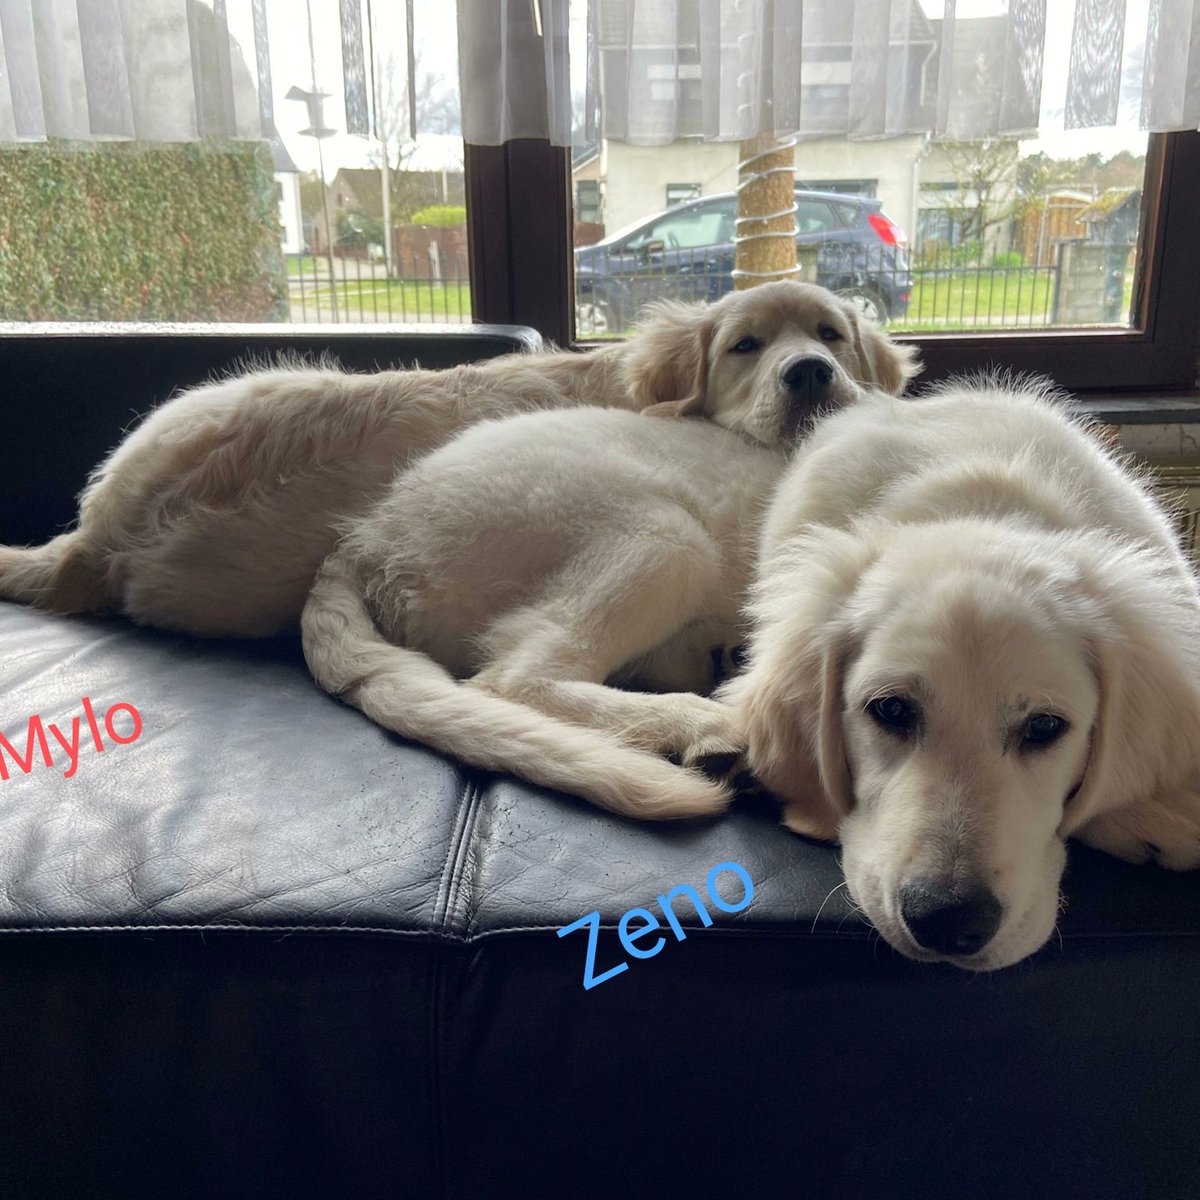 Happy #twoforTuesday, everyone! Look at our cuties on the couch! 🐕‍🦺🐕‍🦺 How they 've grown already! 🥰 #GoldenRetriever #dogs #brothers #couchpotatoes